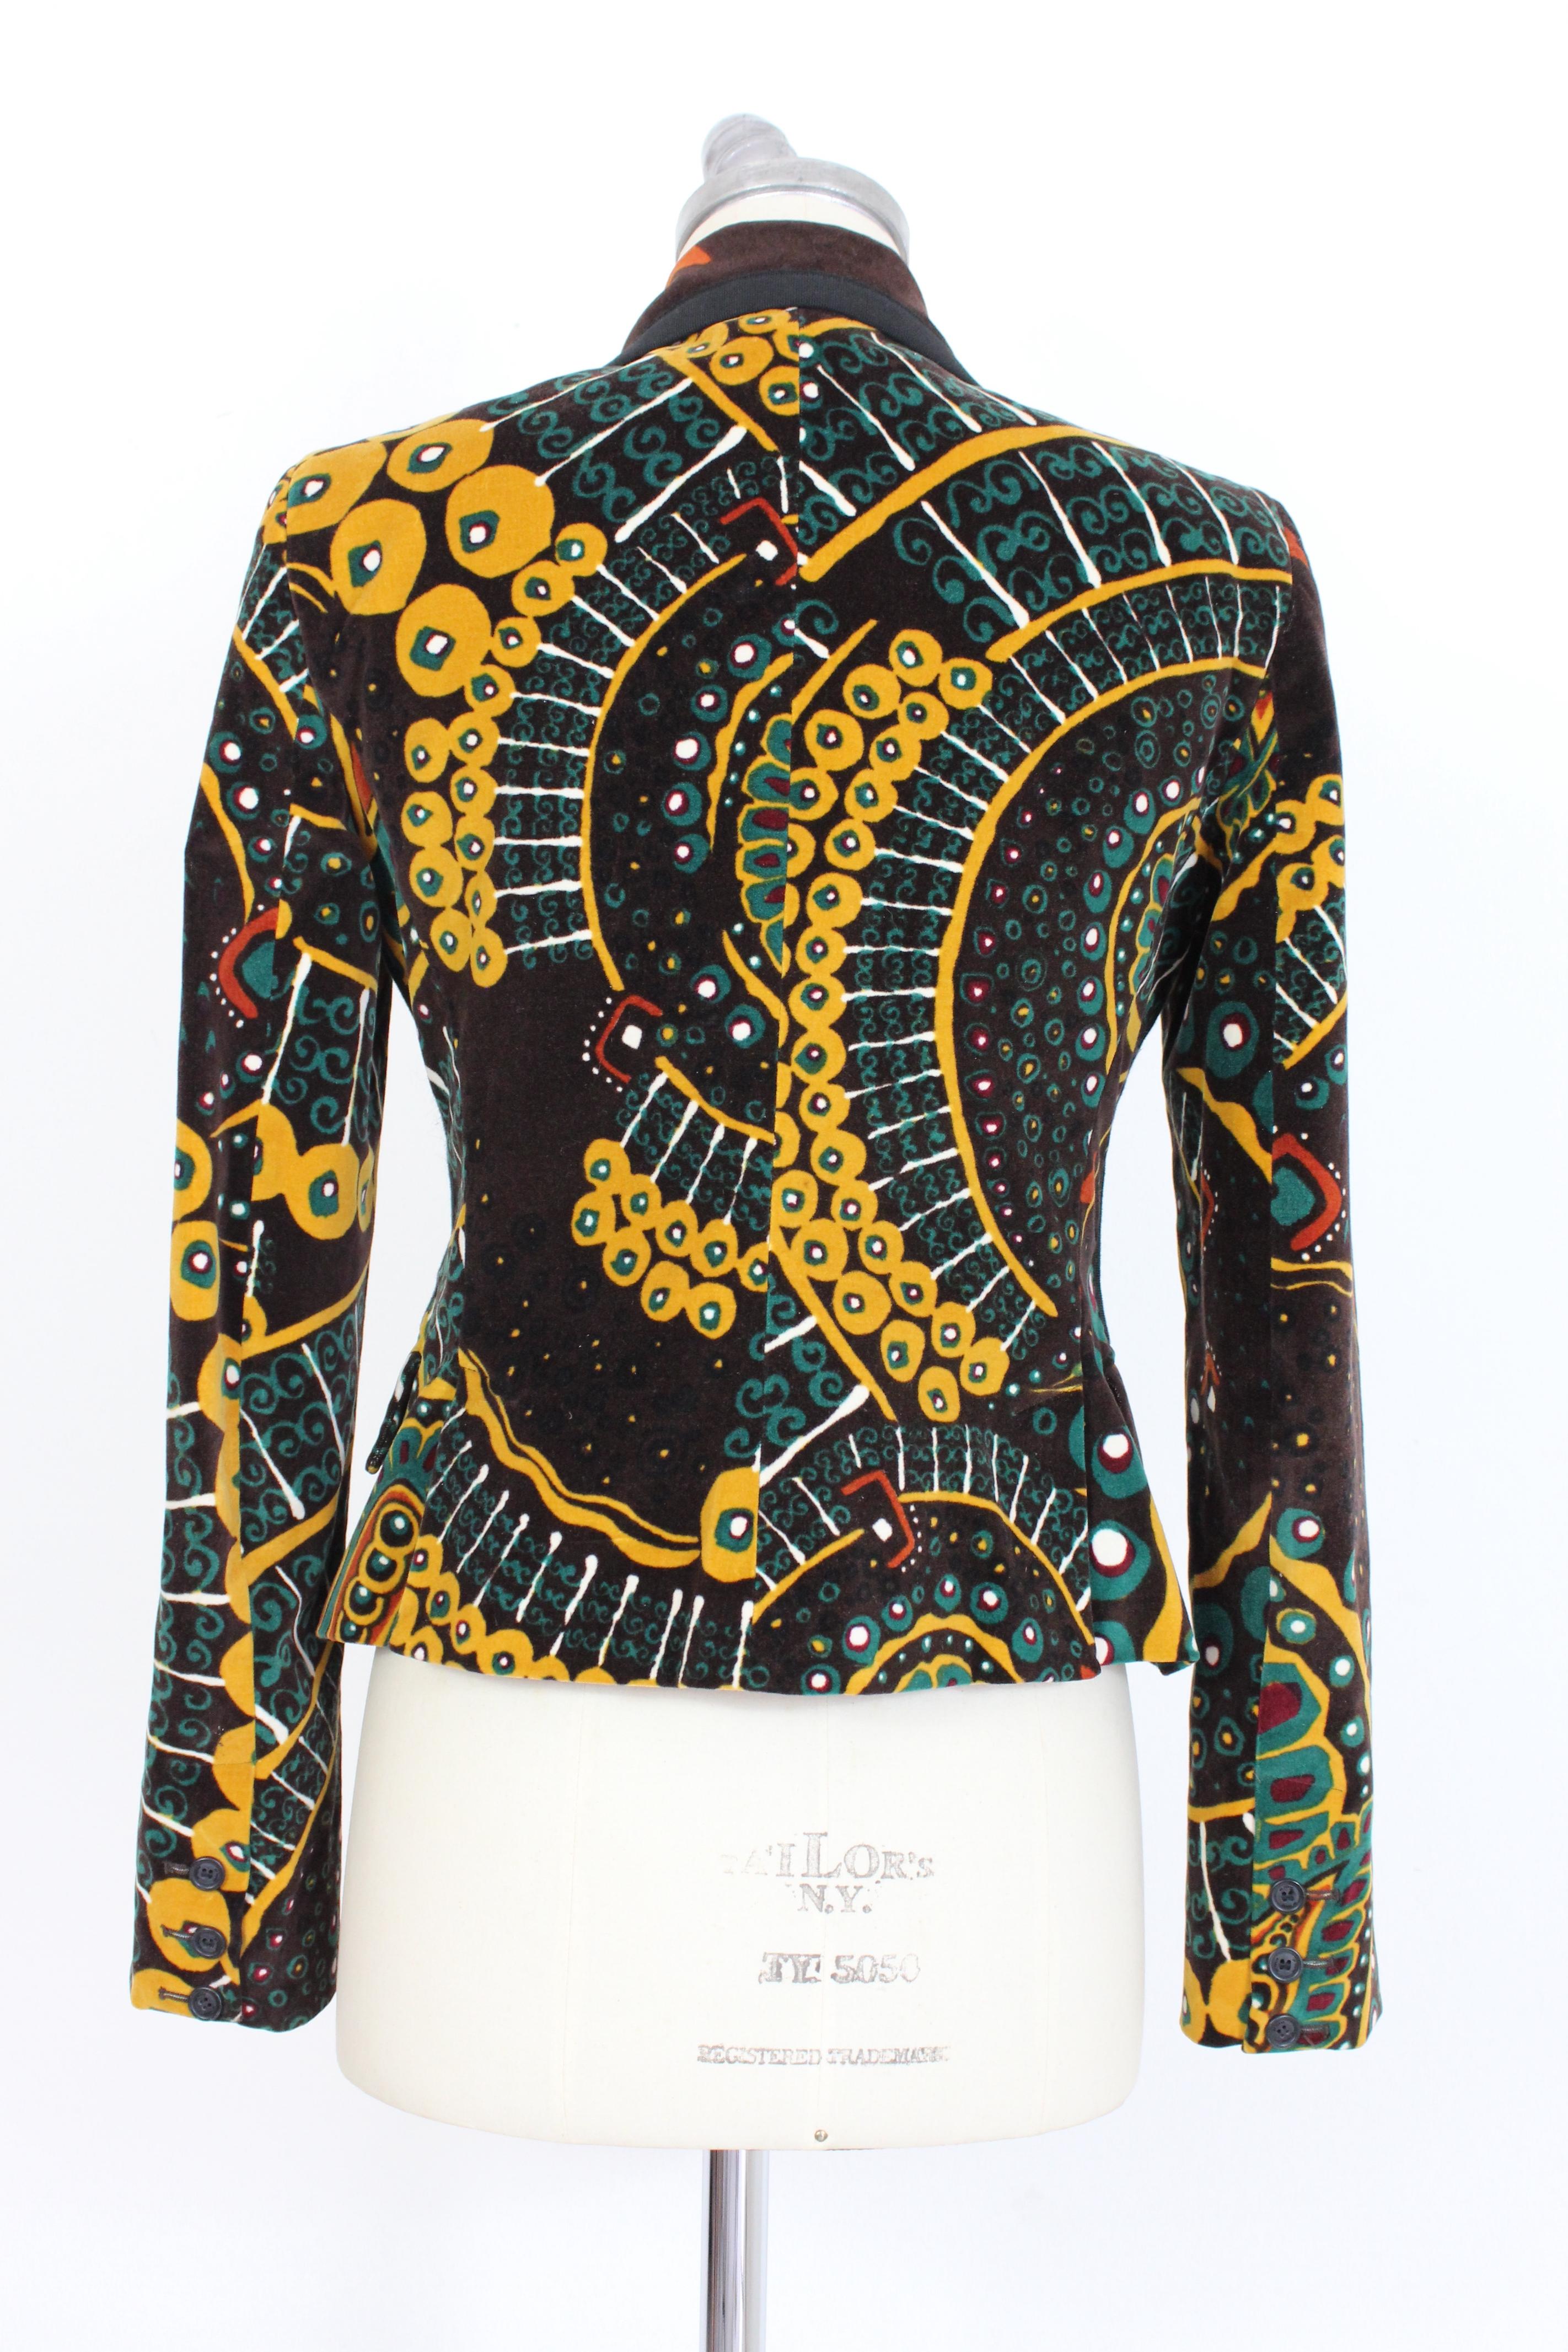 Gianfranco Ferre vintage 90s women's jacket. Fitted jacket, brown with green and yellow paisley designs. Velvet-like fabric, 96% cotton, 4% other fibers, fully lined. Closure with clip. Made in Italy.

Condition: Excellent

Article used few times,